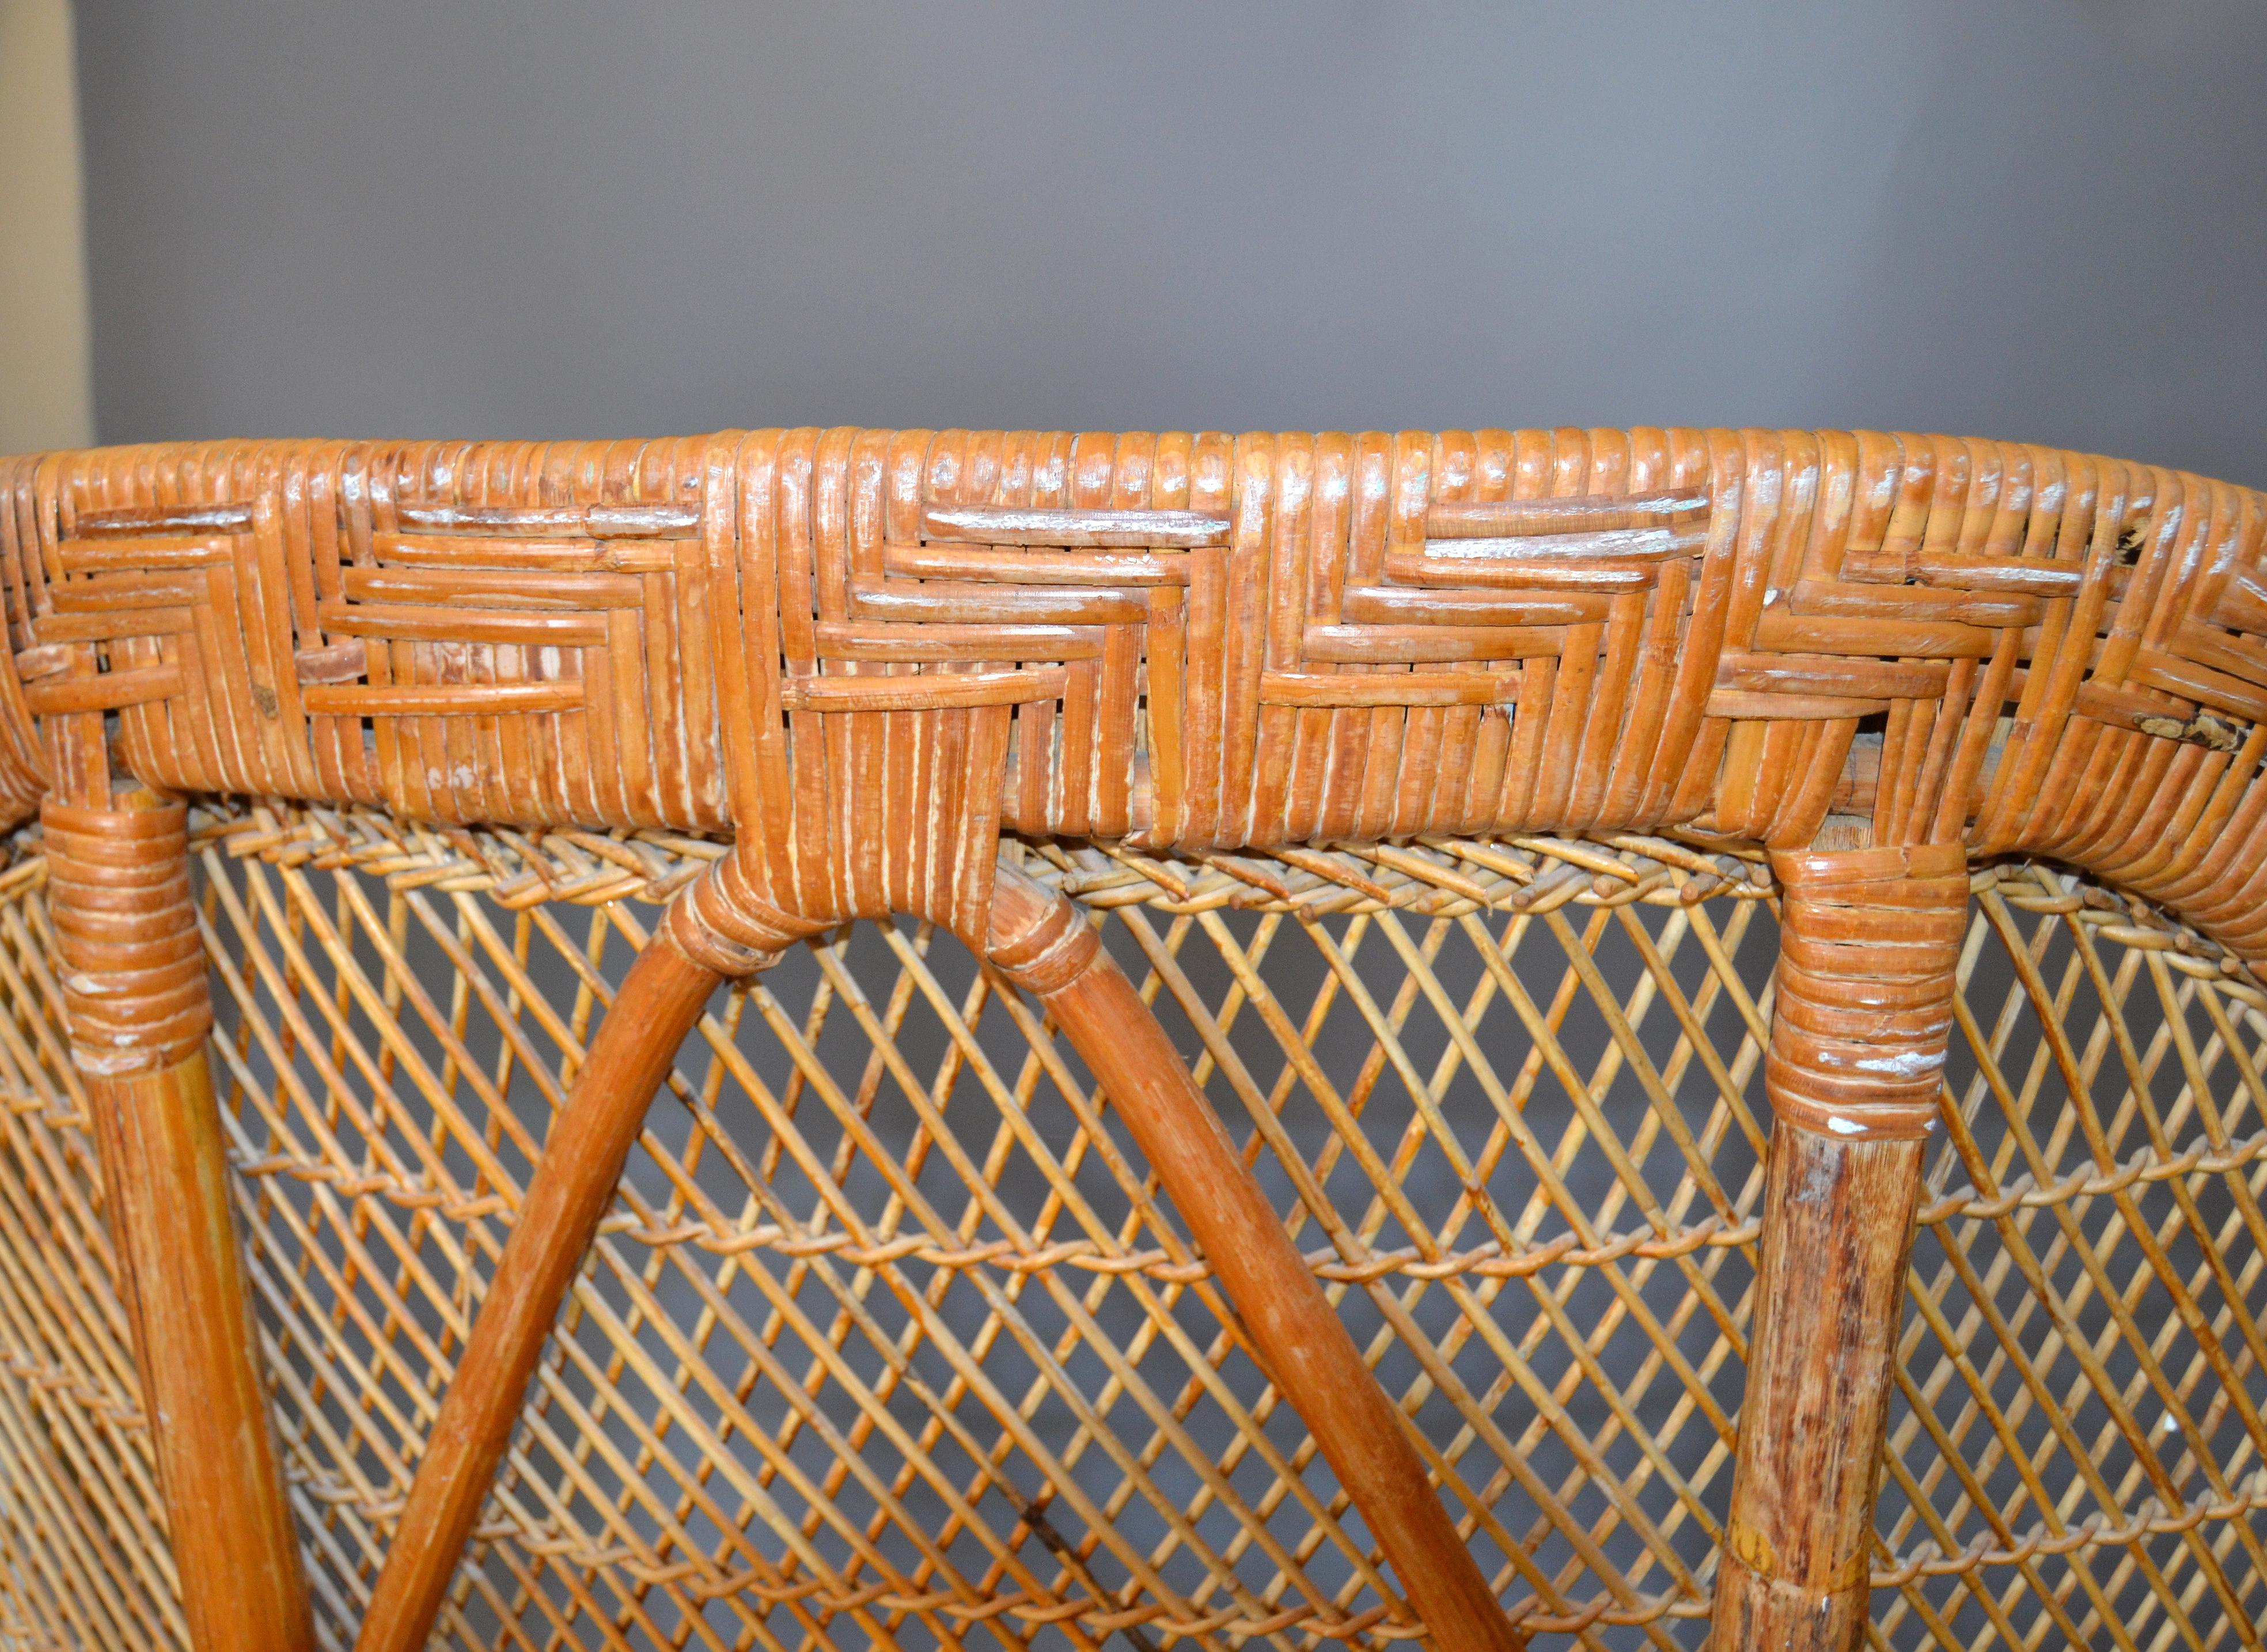 Vintage Boho Chic Handcrafted Wicker, Rattan and Reed Peacock High Back Chair 1